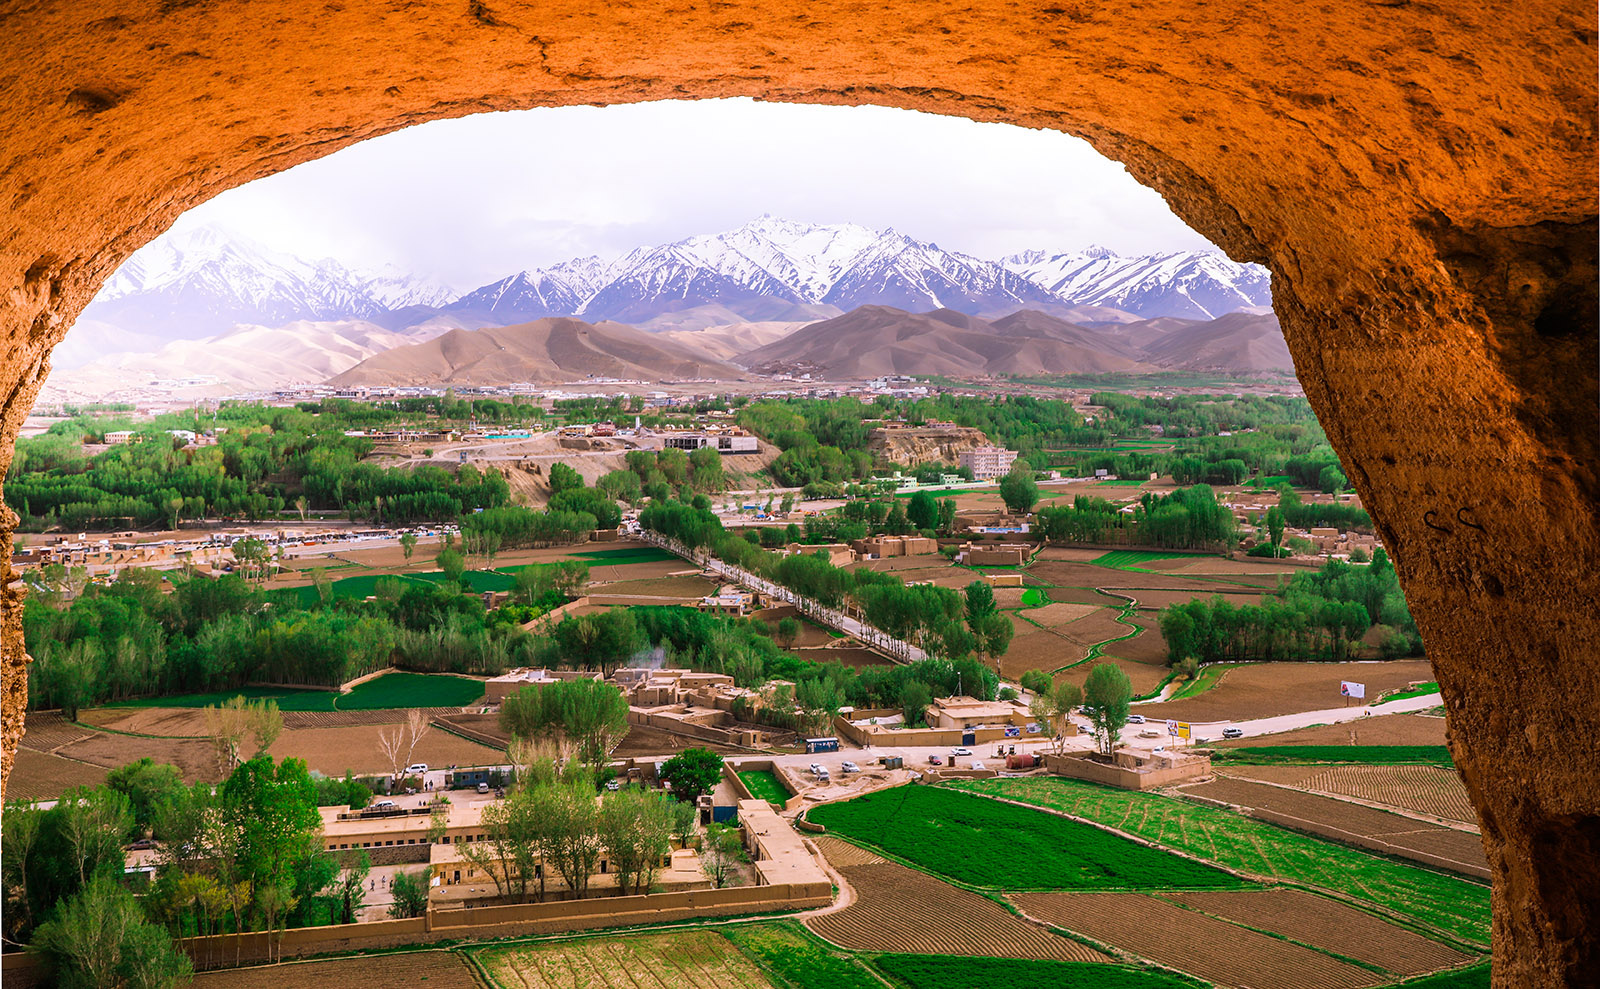 5 Great Books Set in Afghanistan That Deepened Our Understanding